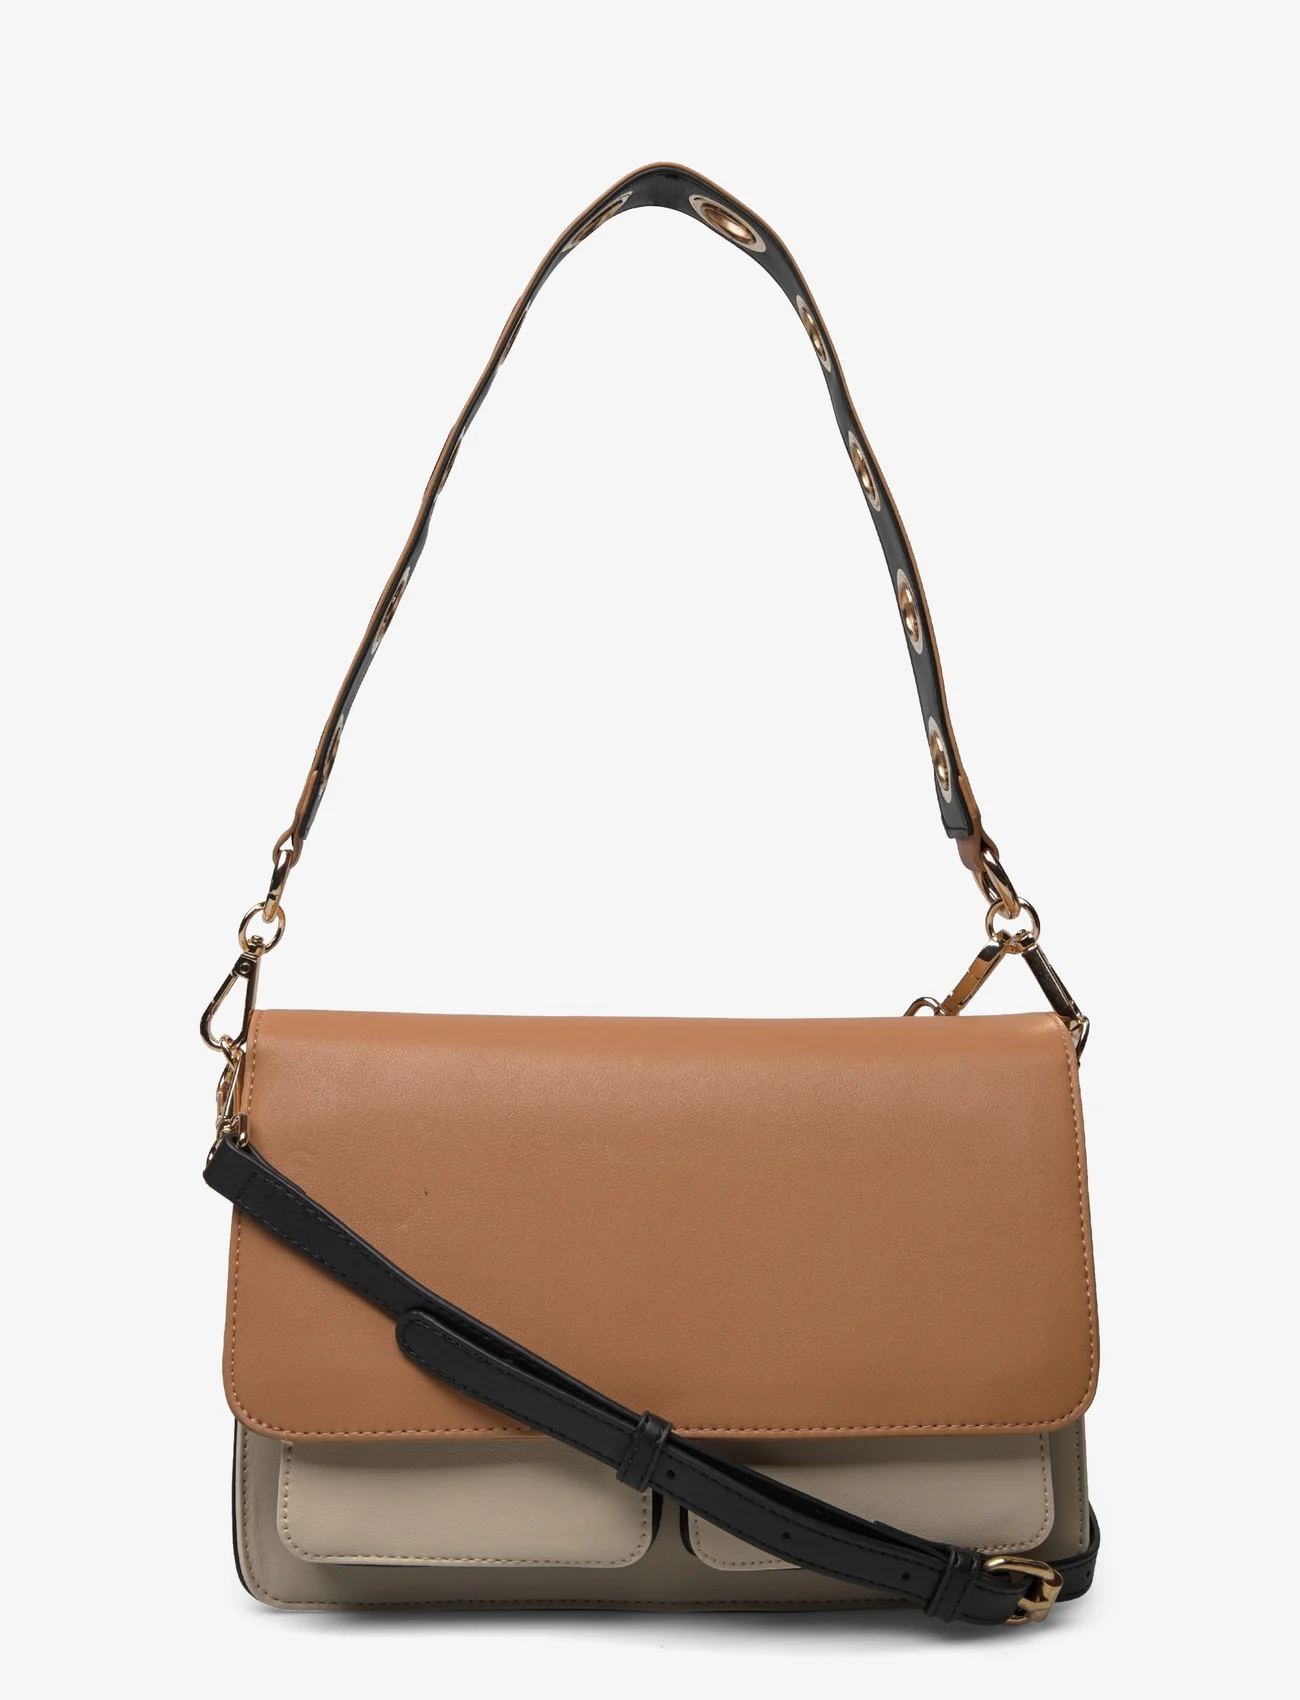 Noella - Isla Bag - party wear at outlet prices - camel/sand/black - 0